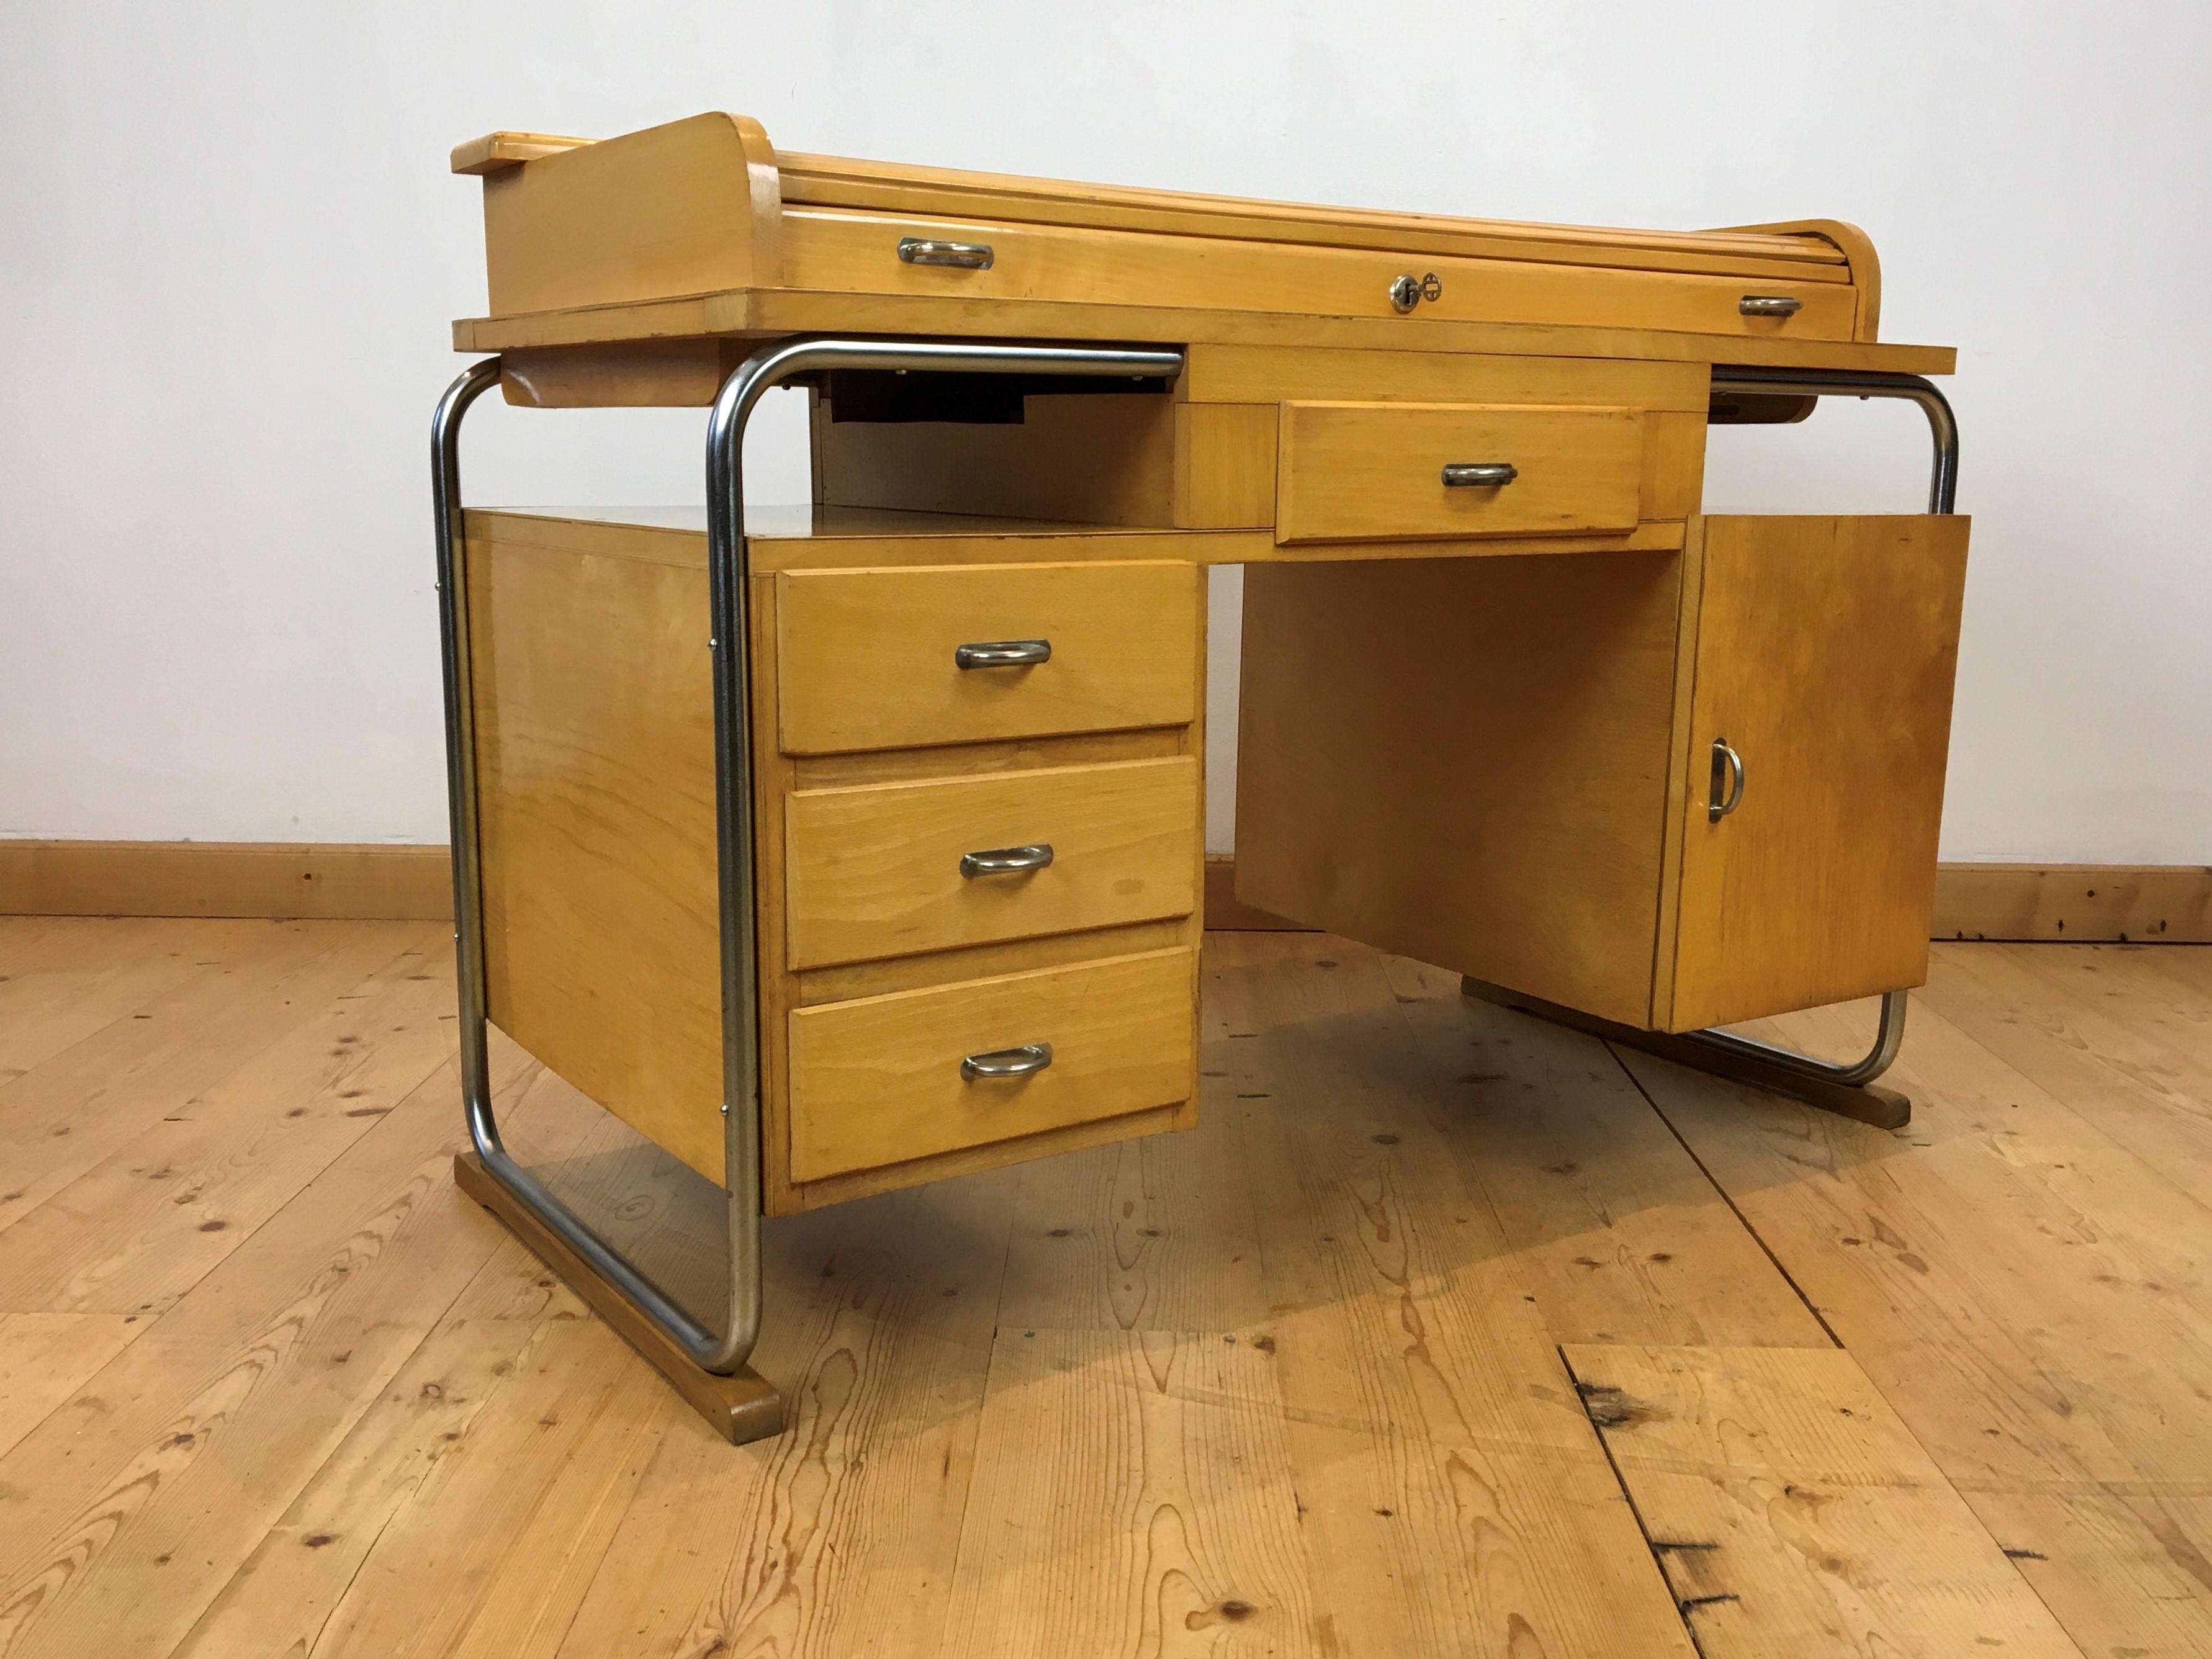 Bauhaus style writing desk by Torck Belgium.
This tambour desk is made of wood with a tubular chromed frame.
The design and shape of this desk is amazing. 
Can be used as a desk but also as a wall table or console table as it has a  beautiful shape.